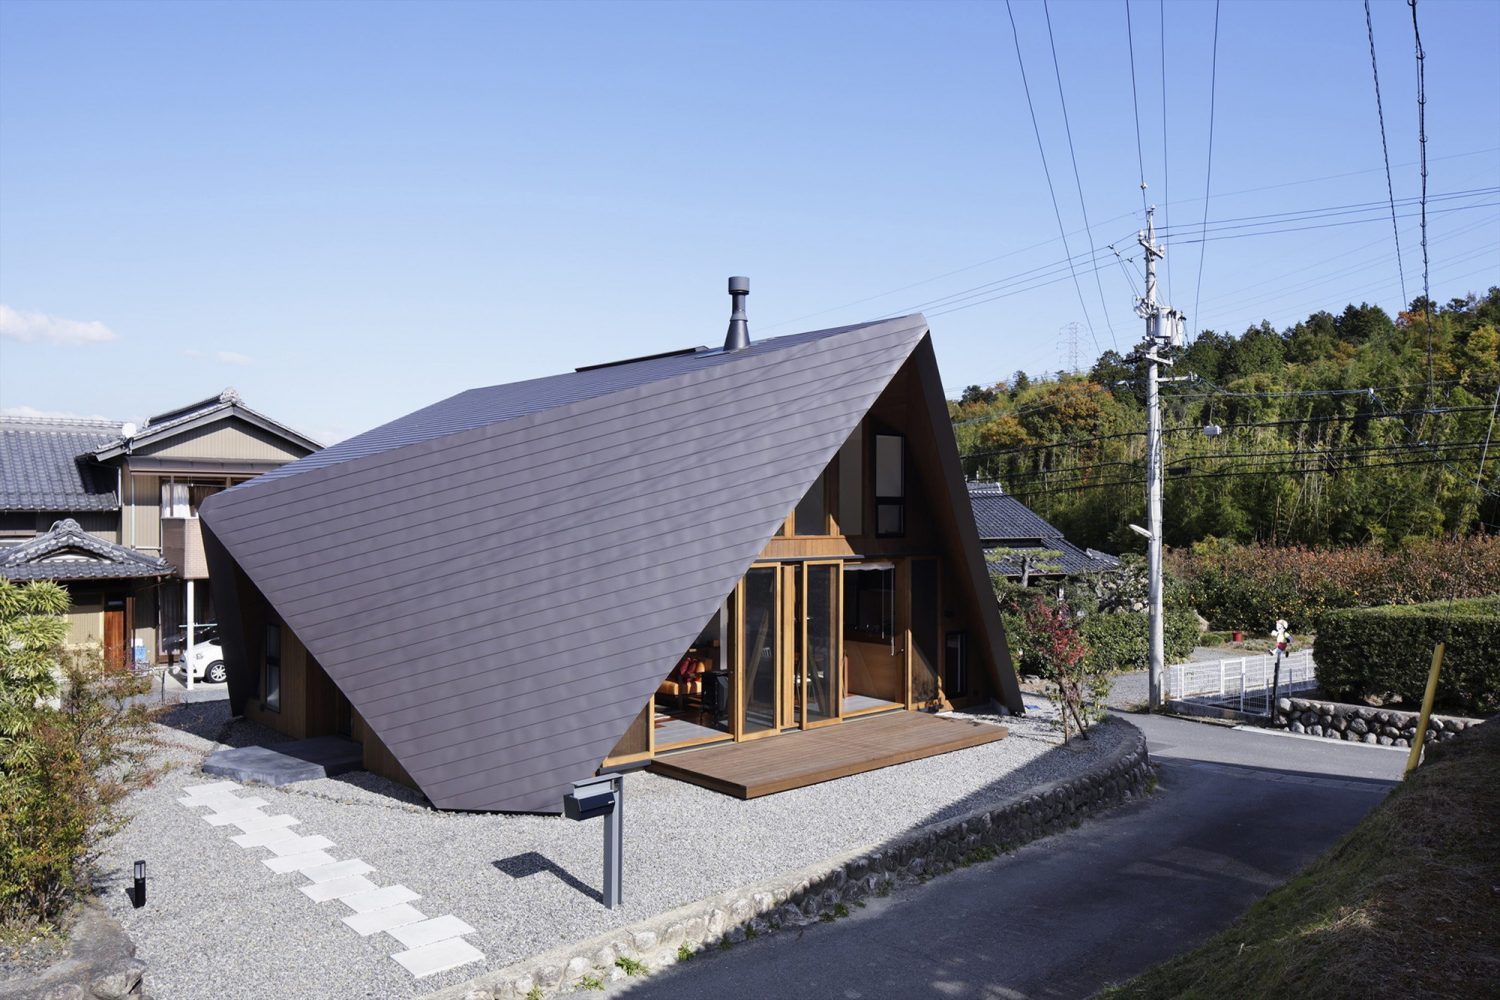 Origami House | Home with an Origami-Like Roof